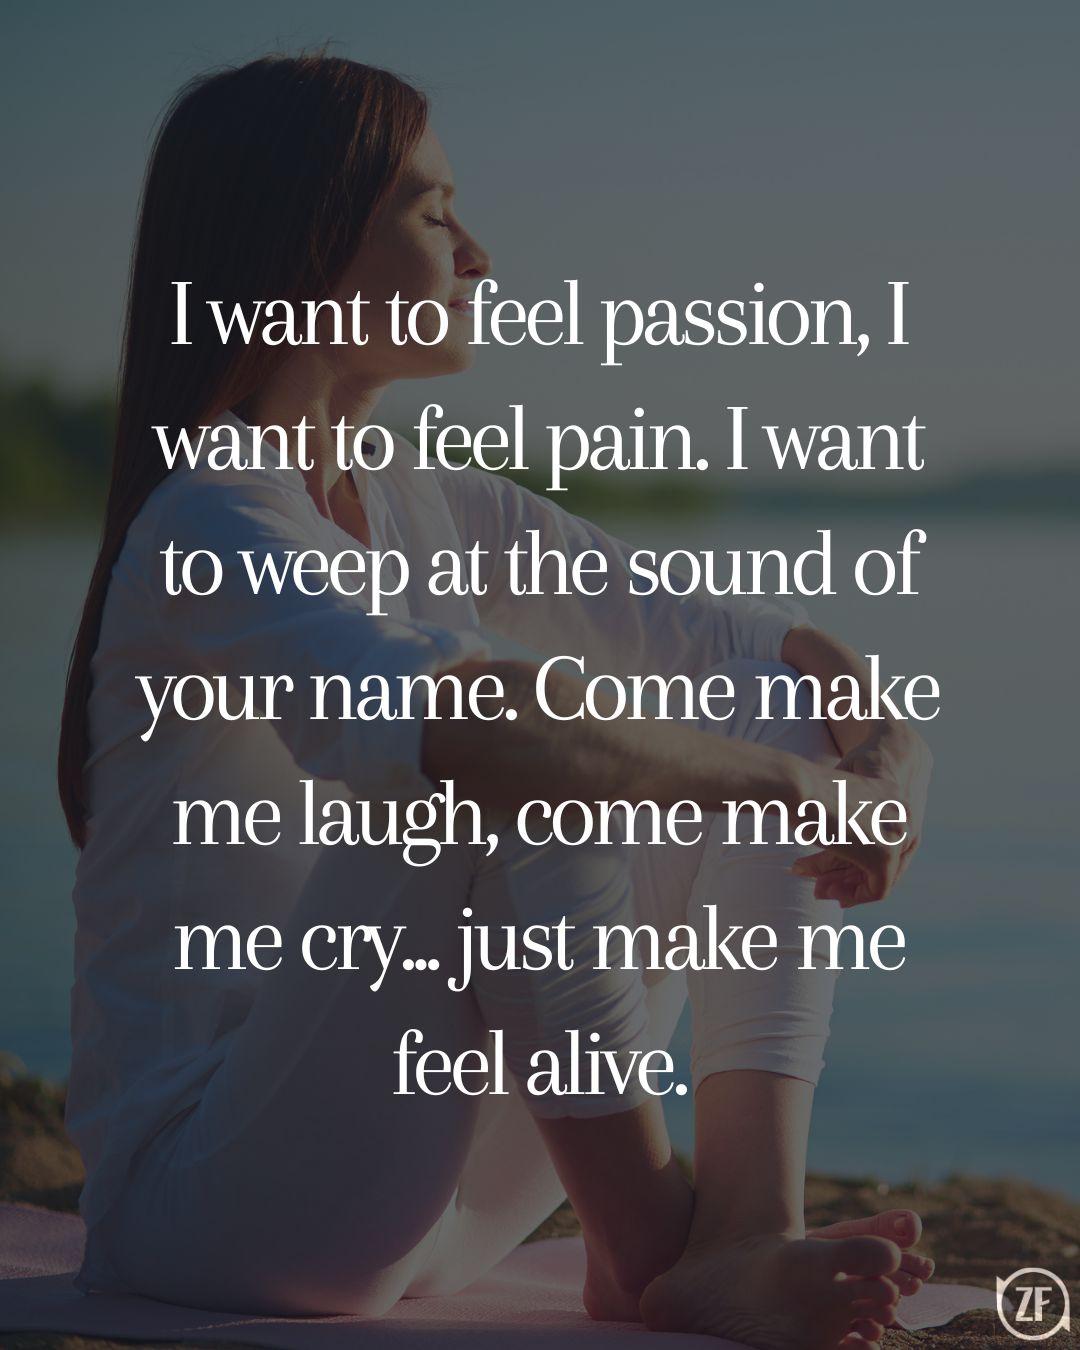 I want to feel passion, I want to feel pain. I want to weep at the sound of your name. Come make me laugh, come make me cry... just make me feel alive.